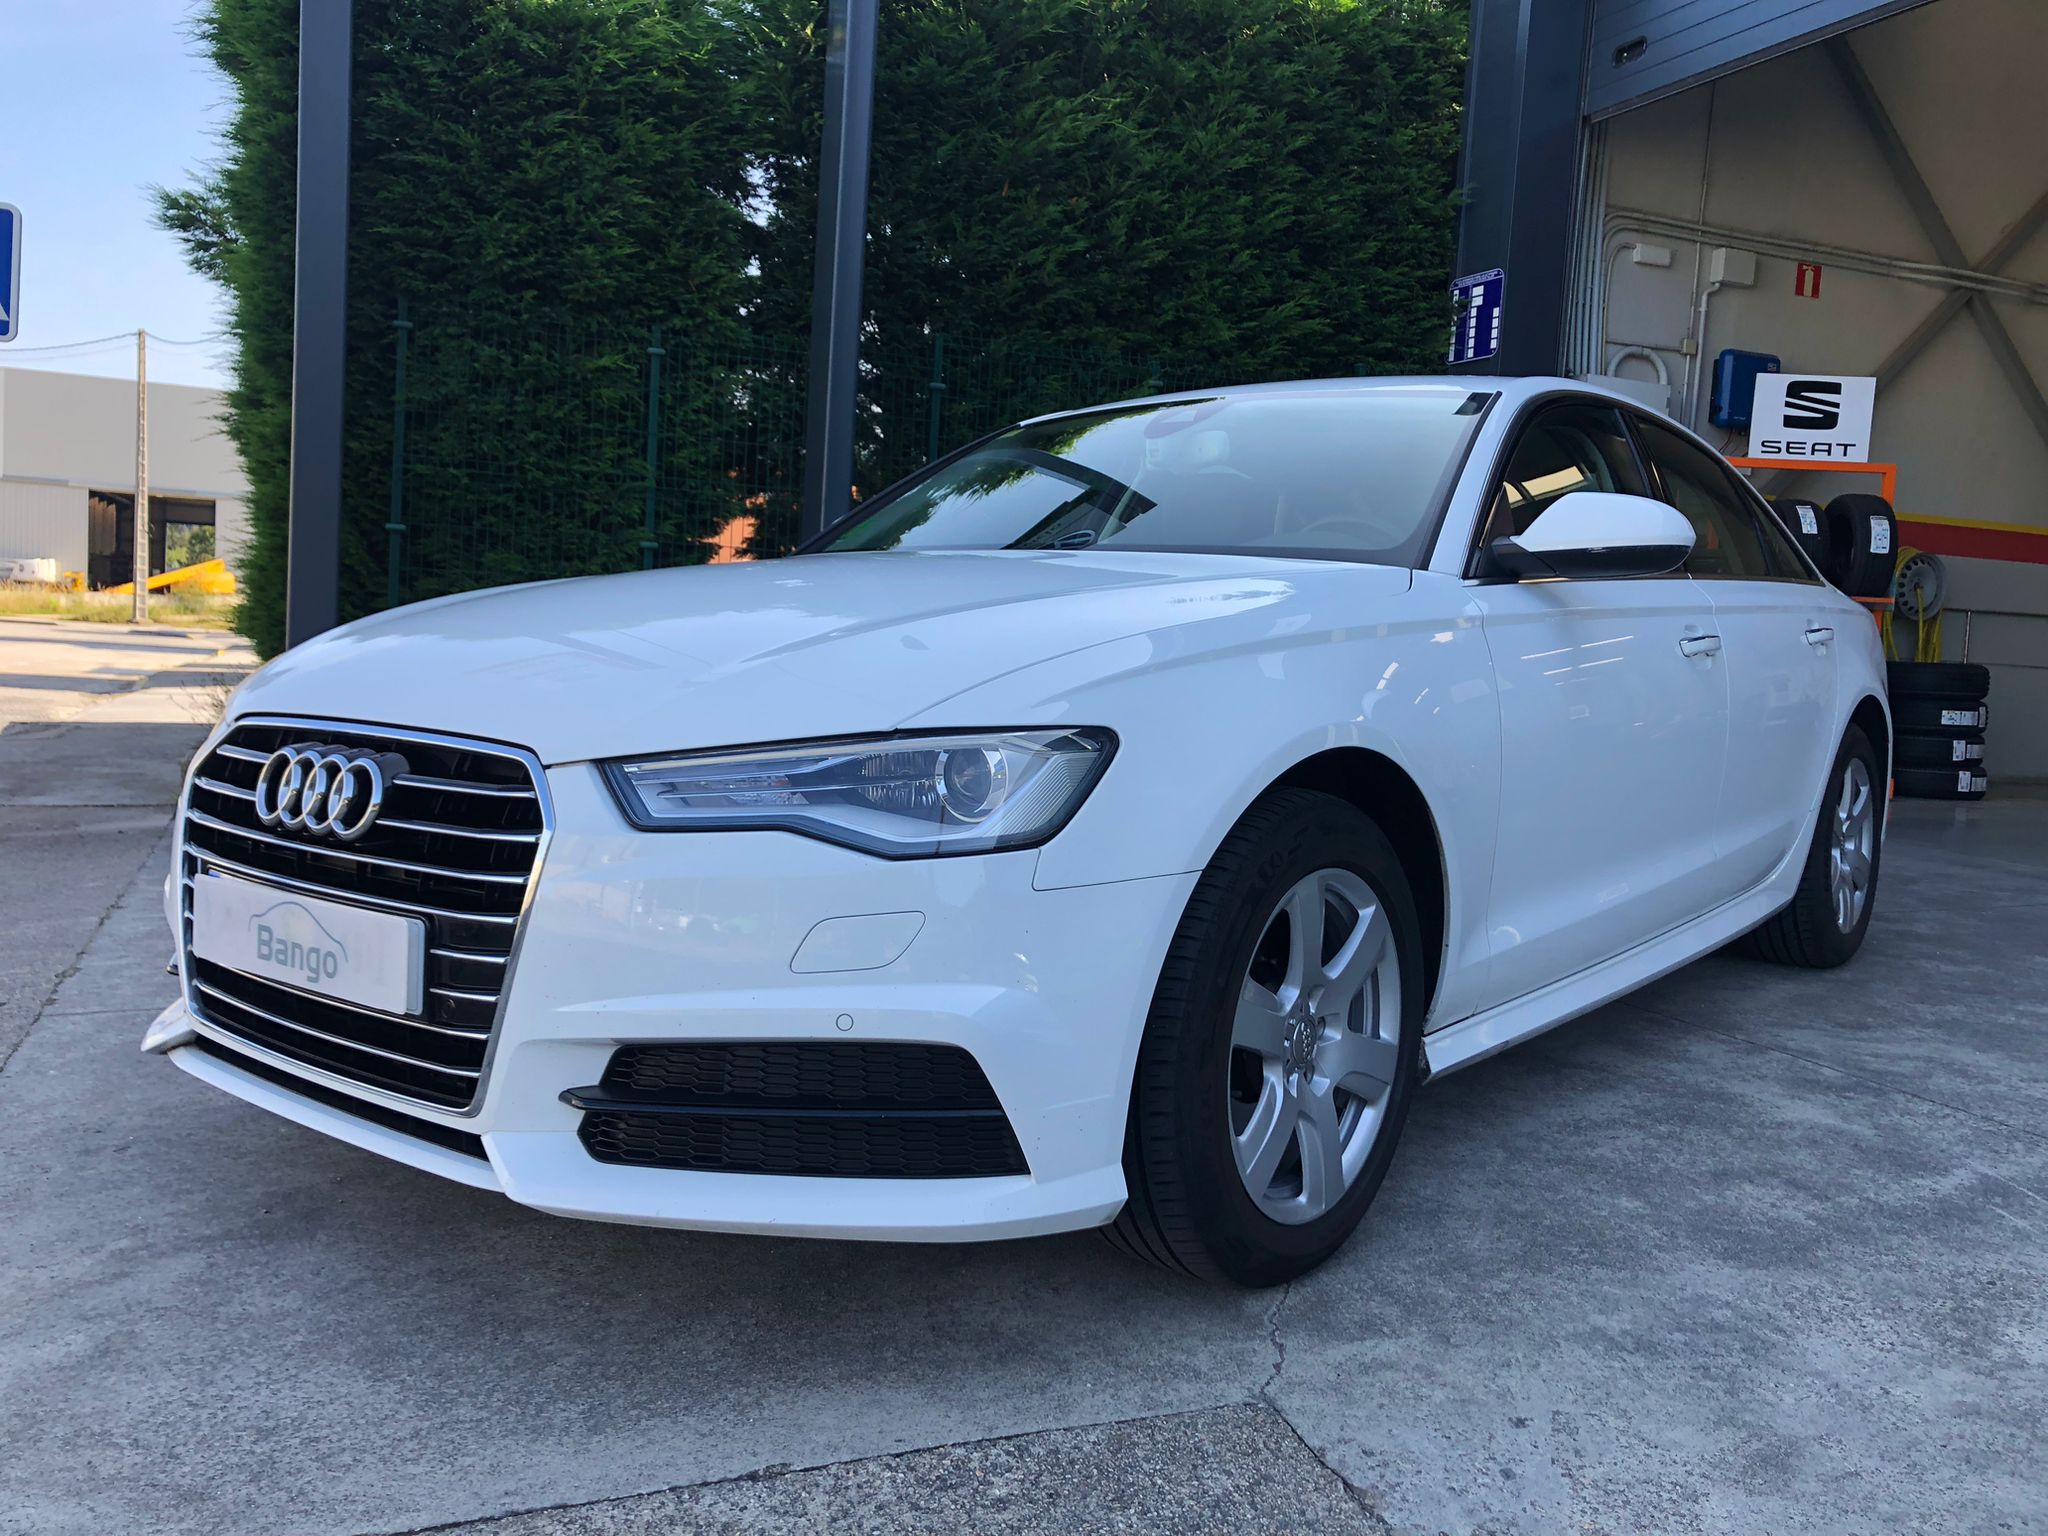 AUDI - A6 2.0 TDI 110kW150CV ultra S tronic frontal lateral cerca